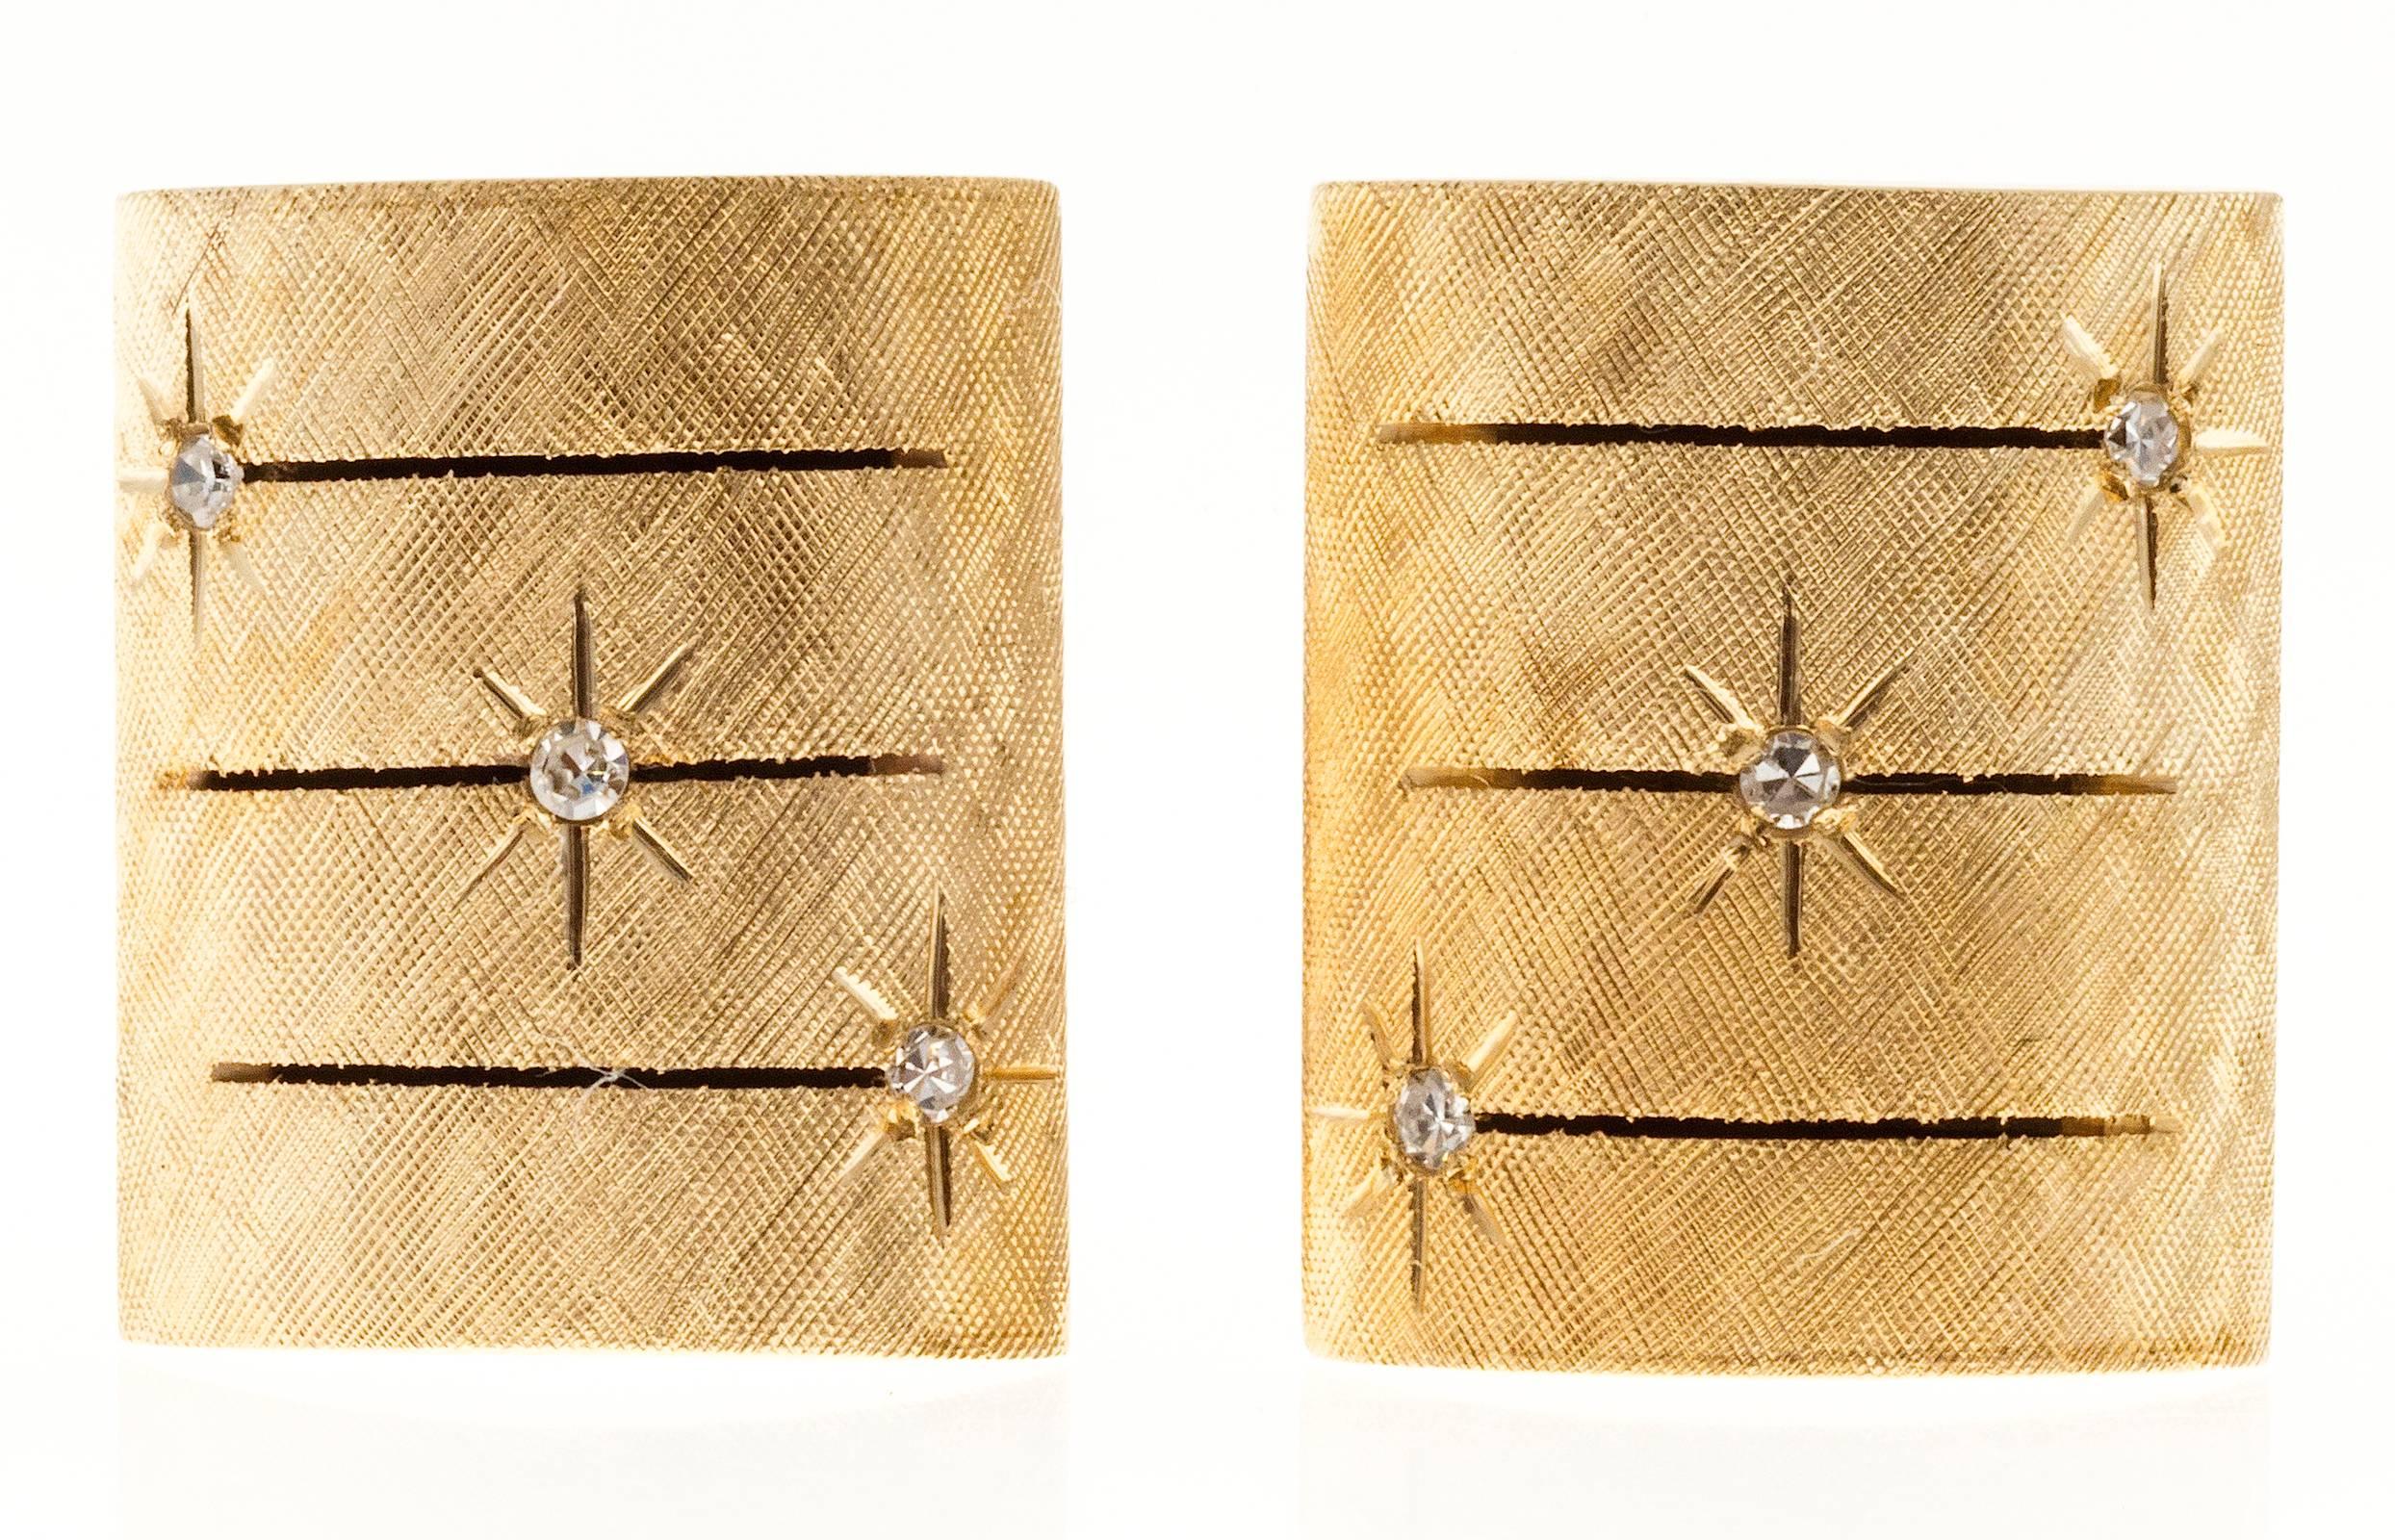 1950 domed 14k gold cuff links. Hand made with Florentine finish tops and star set diamonds. Hand Florentined finish and hand cut slits on tops.

6 star set single cut diamonds, approx. total weight .15cts, H, VS
14k Yellow Gold
Stamped and